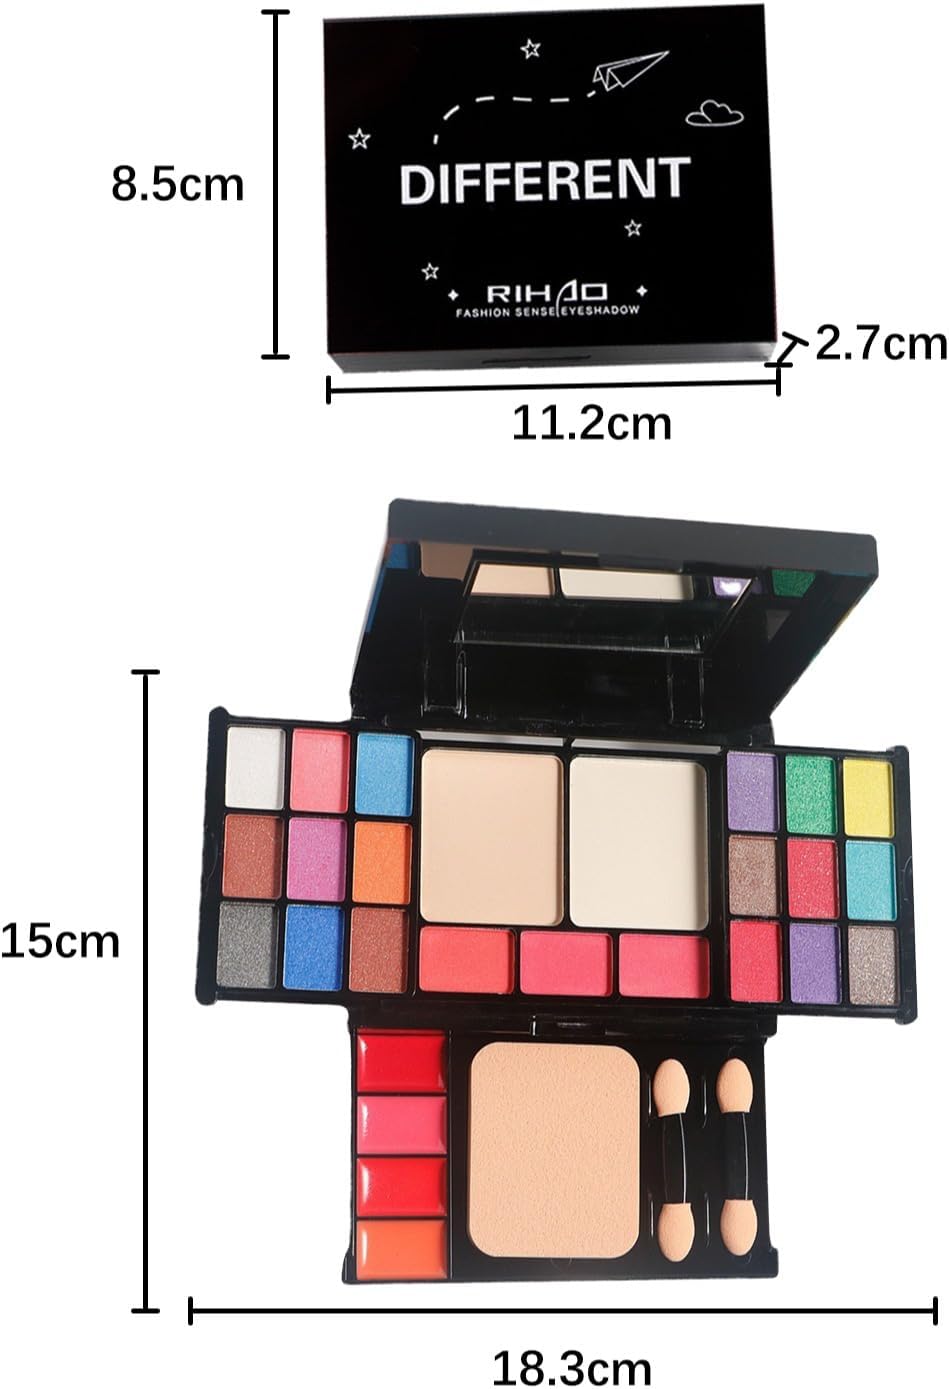 27 Colors Fantasy Different Makeup Box High-Quality Long Lasting Easy to Apply All In One Makeup Gift Set Great Eye Shadow Set Multicolor 1 Pcs